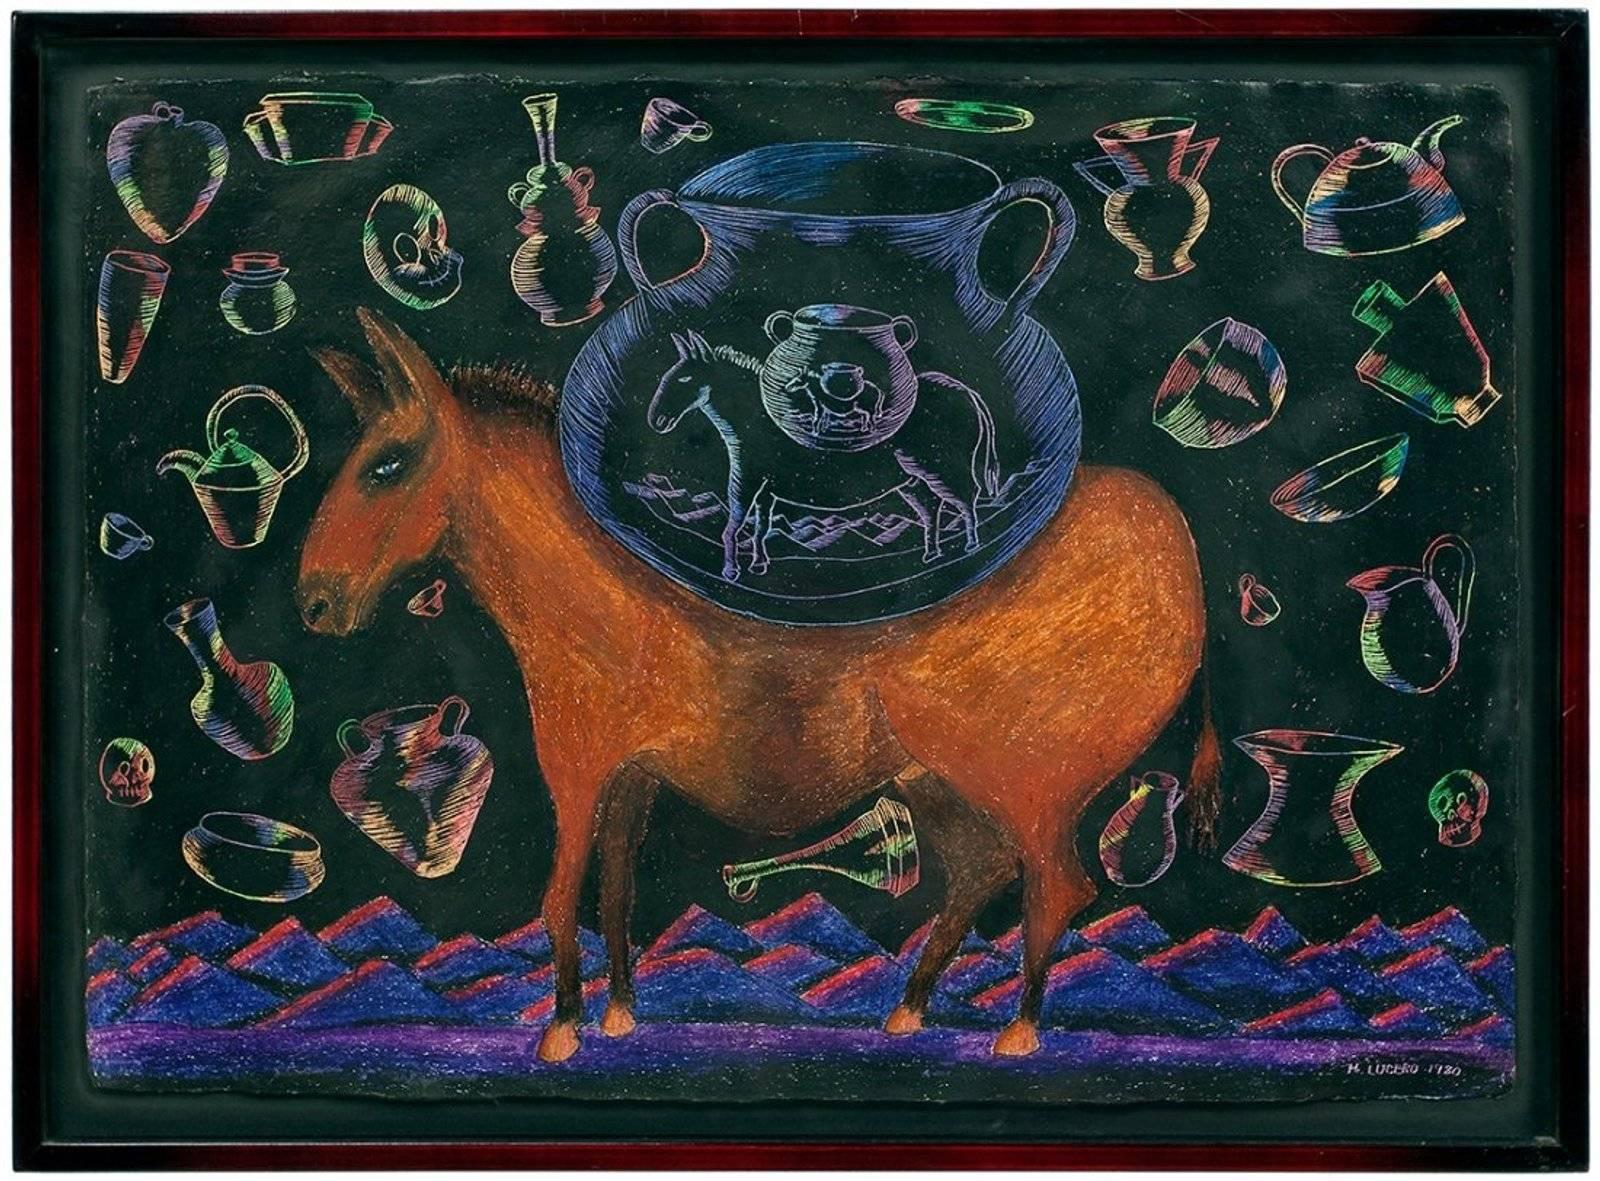 Colored Drawing with Ceramics and Horse Pop Folk Art 1980s  - Black Animal Art by Michael Lucero